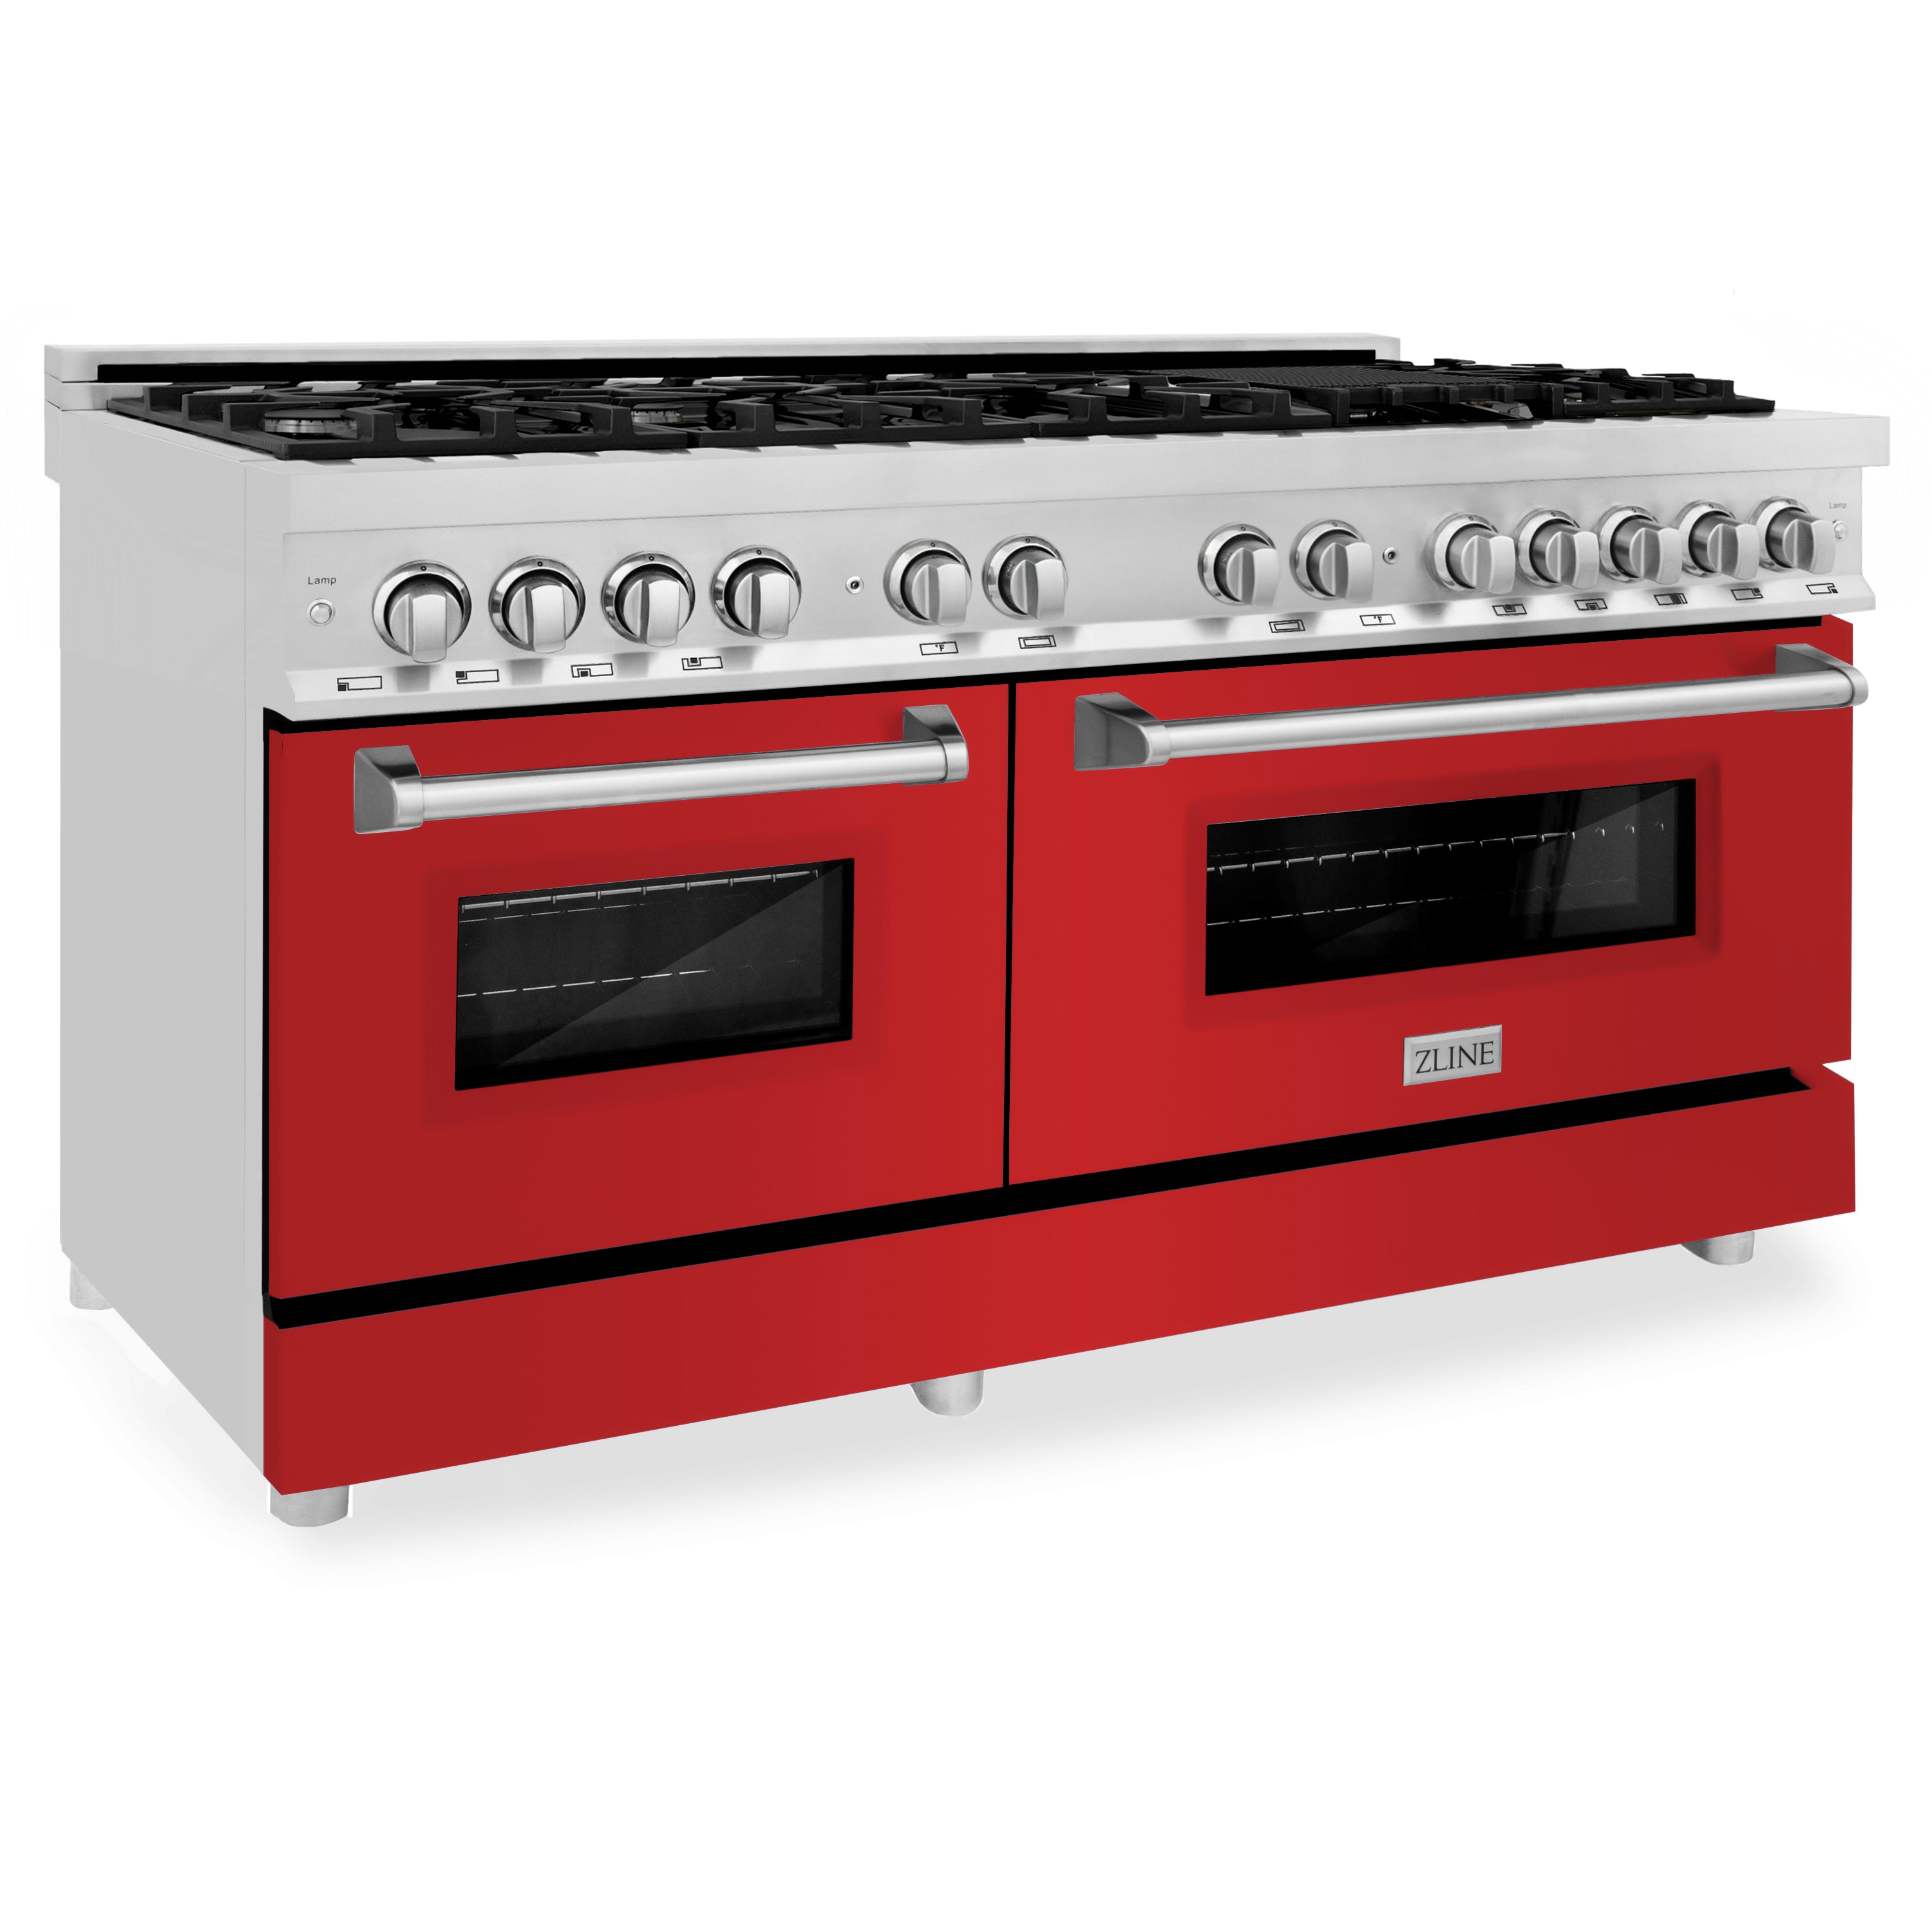 ZLINE 60" 7.4 cu. ft. Dual Fuel Range with Gas Stove and Electric Oven in Stainless Steel and Red Matte Door (RA-RM-60)